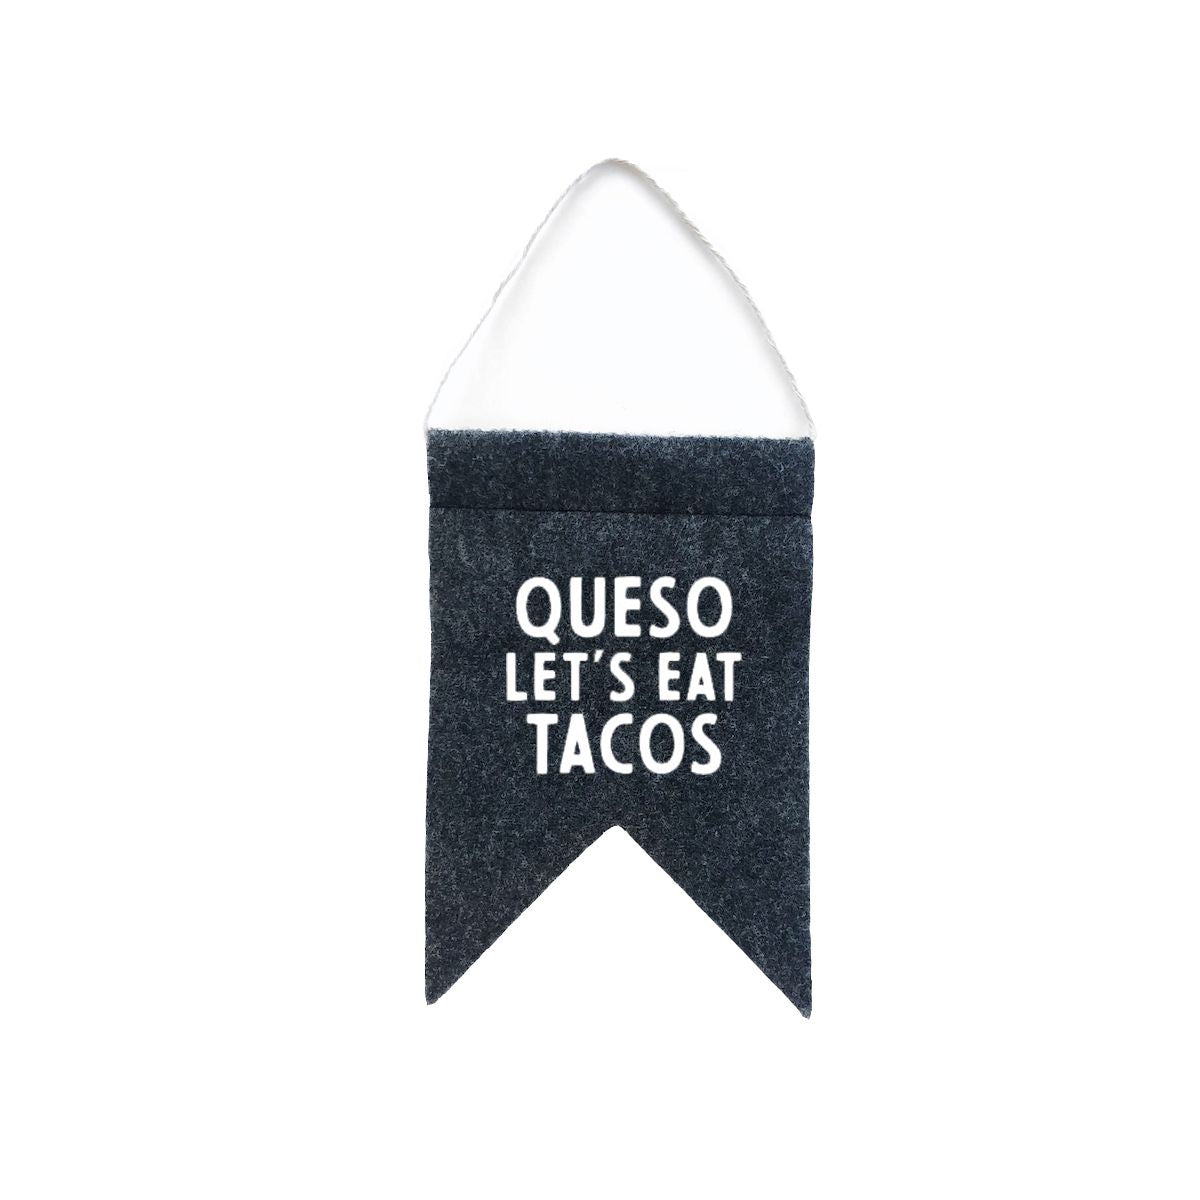 Queso Let's Eat Tacos Small Hanging Pennant